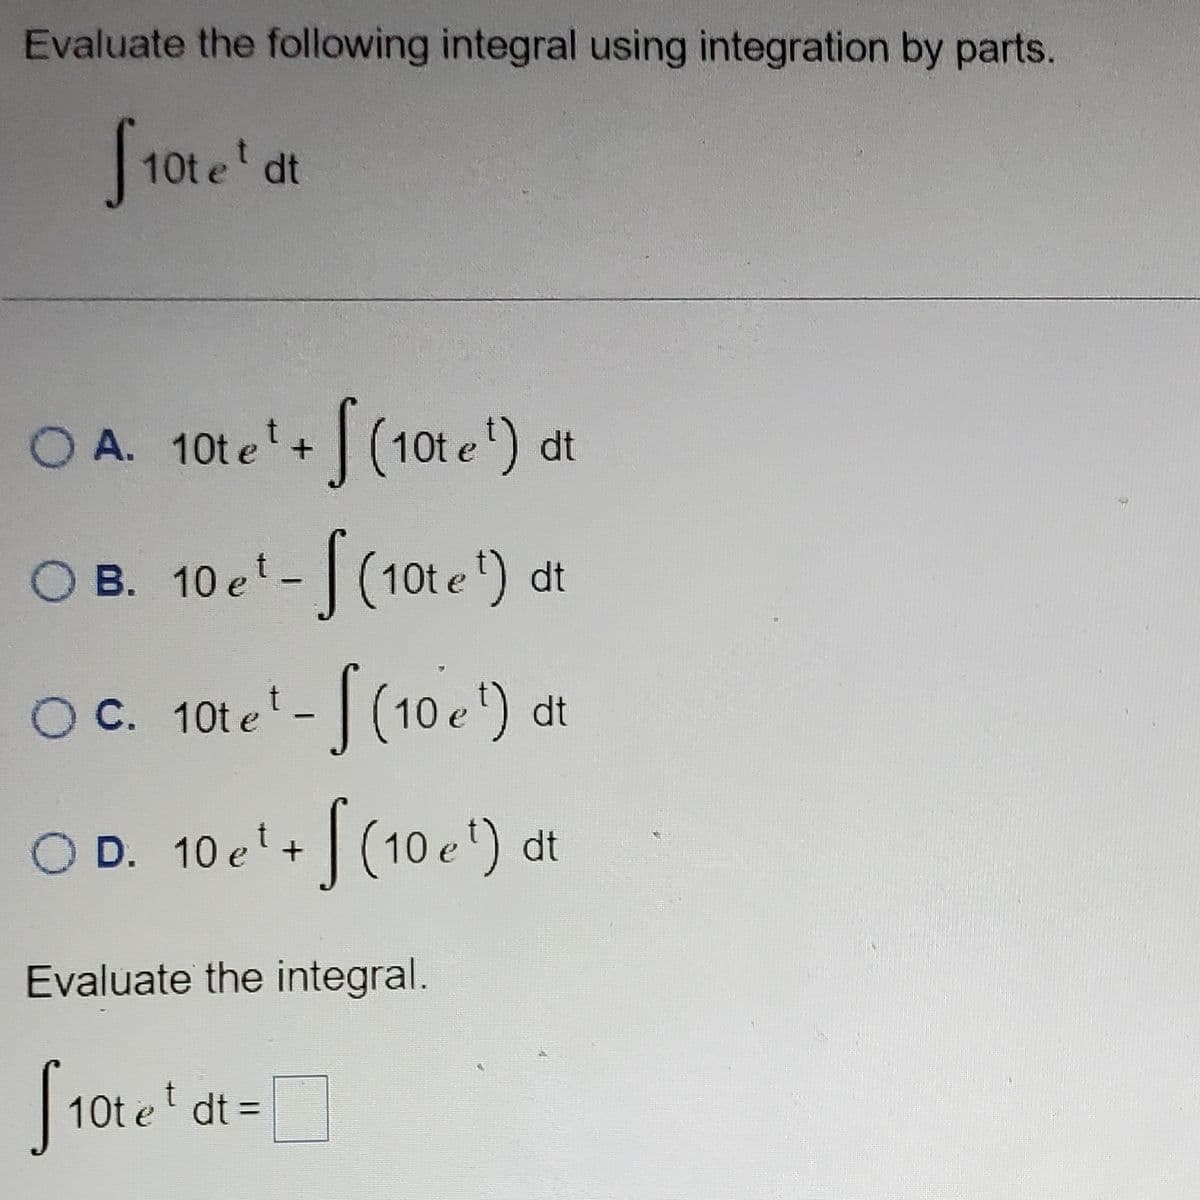 Evaluate the following integral using integration by parts.
[10te' d
dt
OA. 10te¹+ (10te¹) dt
OB. 10 e¹- (10te¹) dt
OC. 10te¹-[(10 e¹)
OD. 10e¹ + f(10e¹)
Evaluate the integral.
f10tet
10te¹ dt =
dt
dt